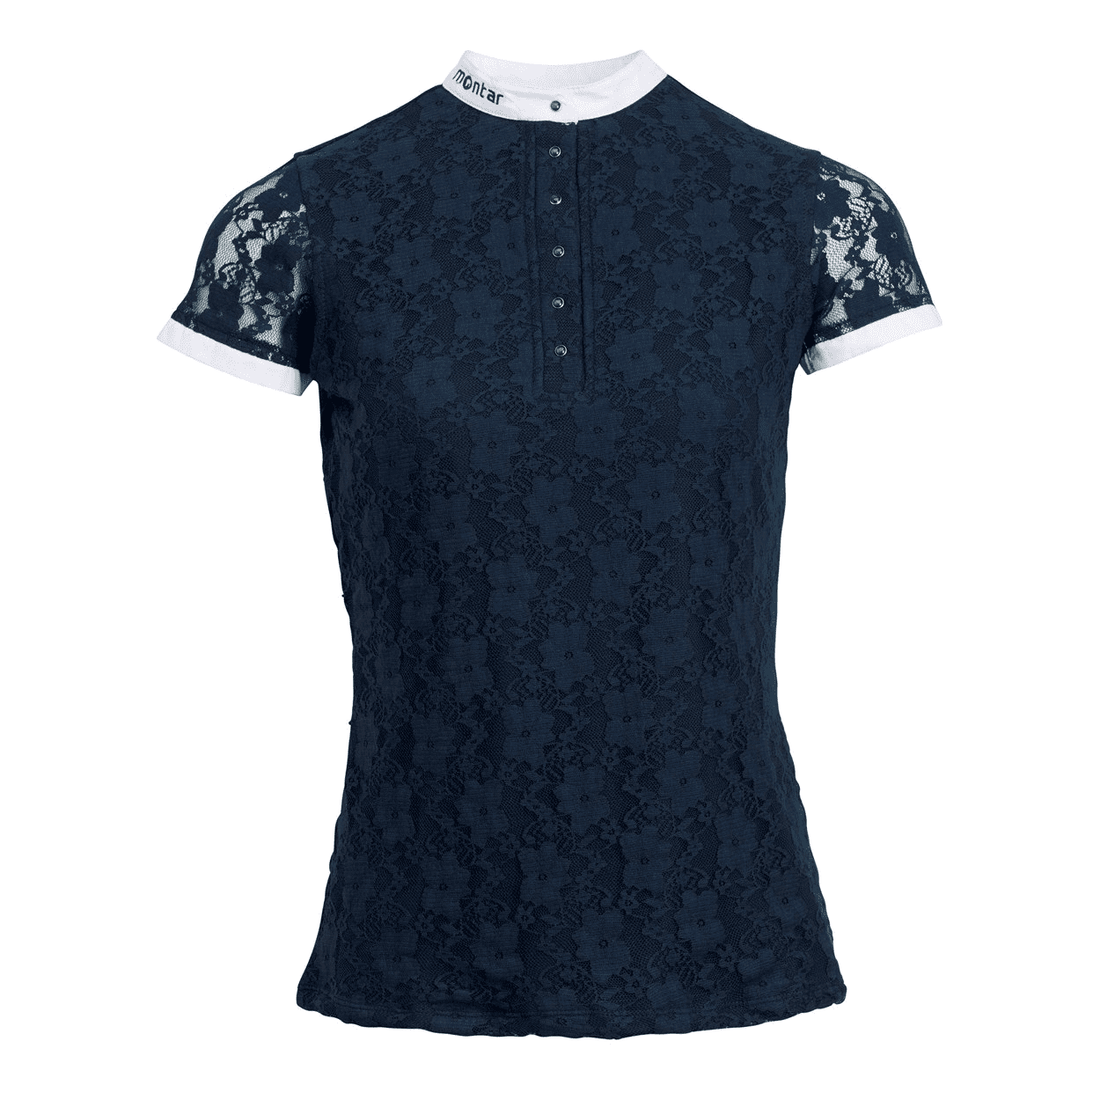 Montar amelia competition shirt lace style Montar